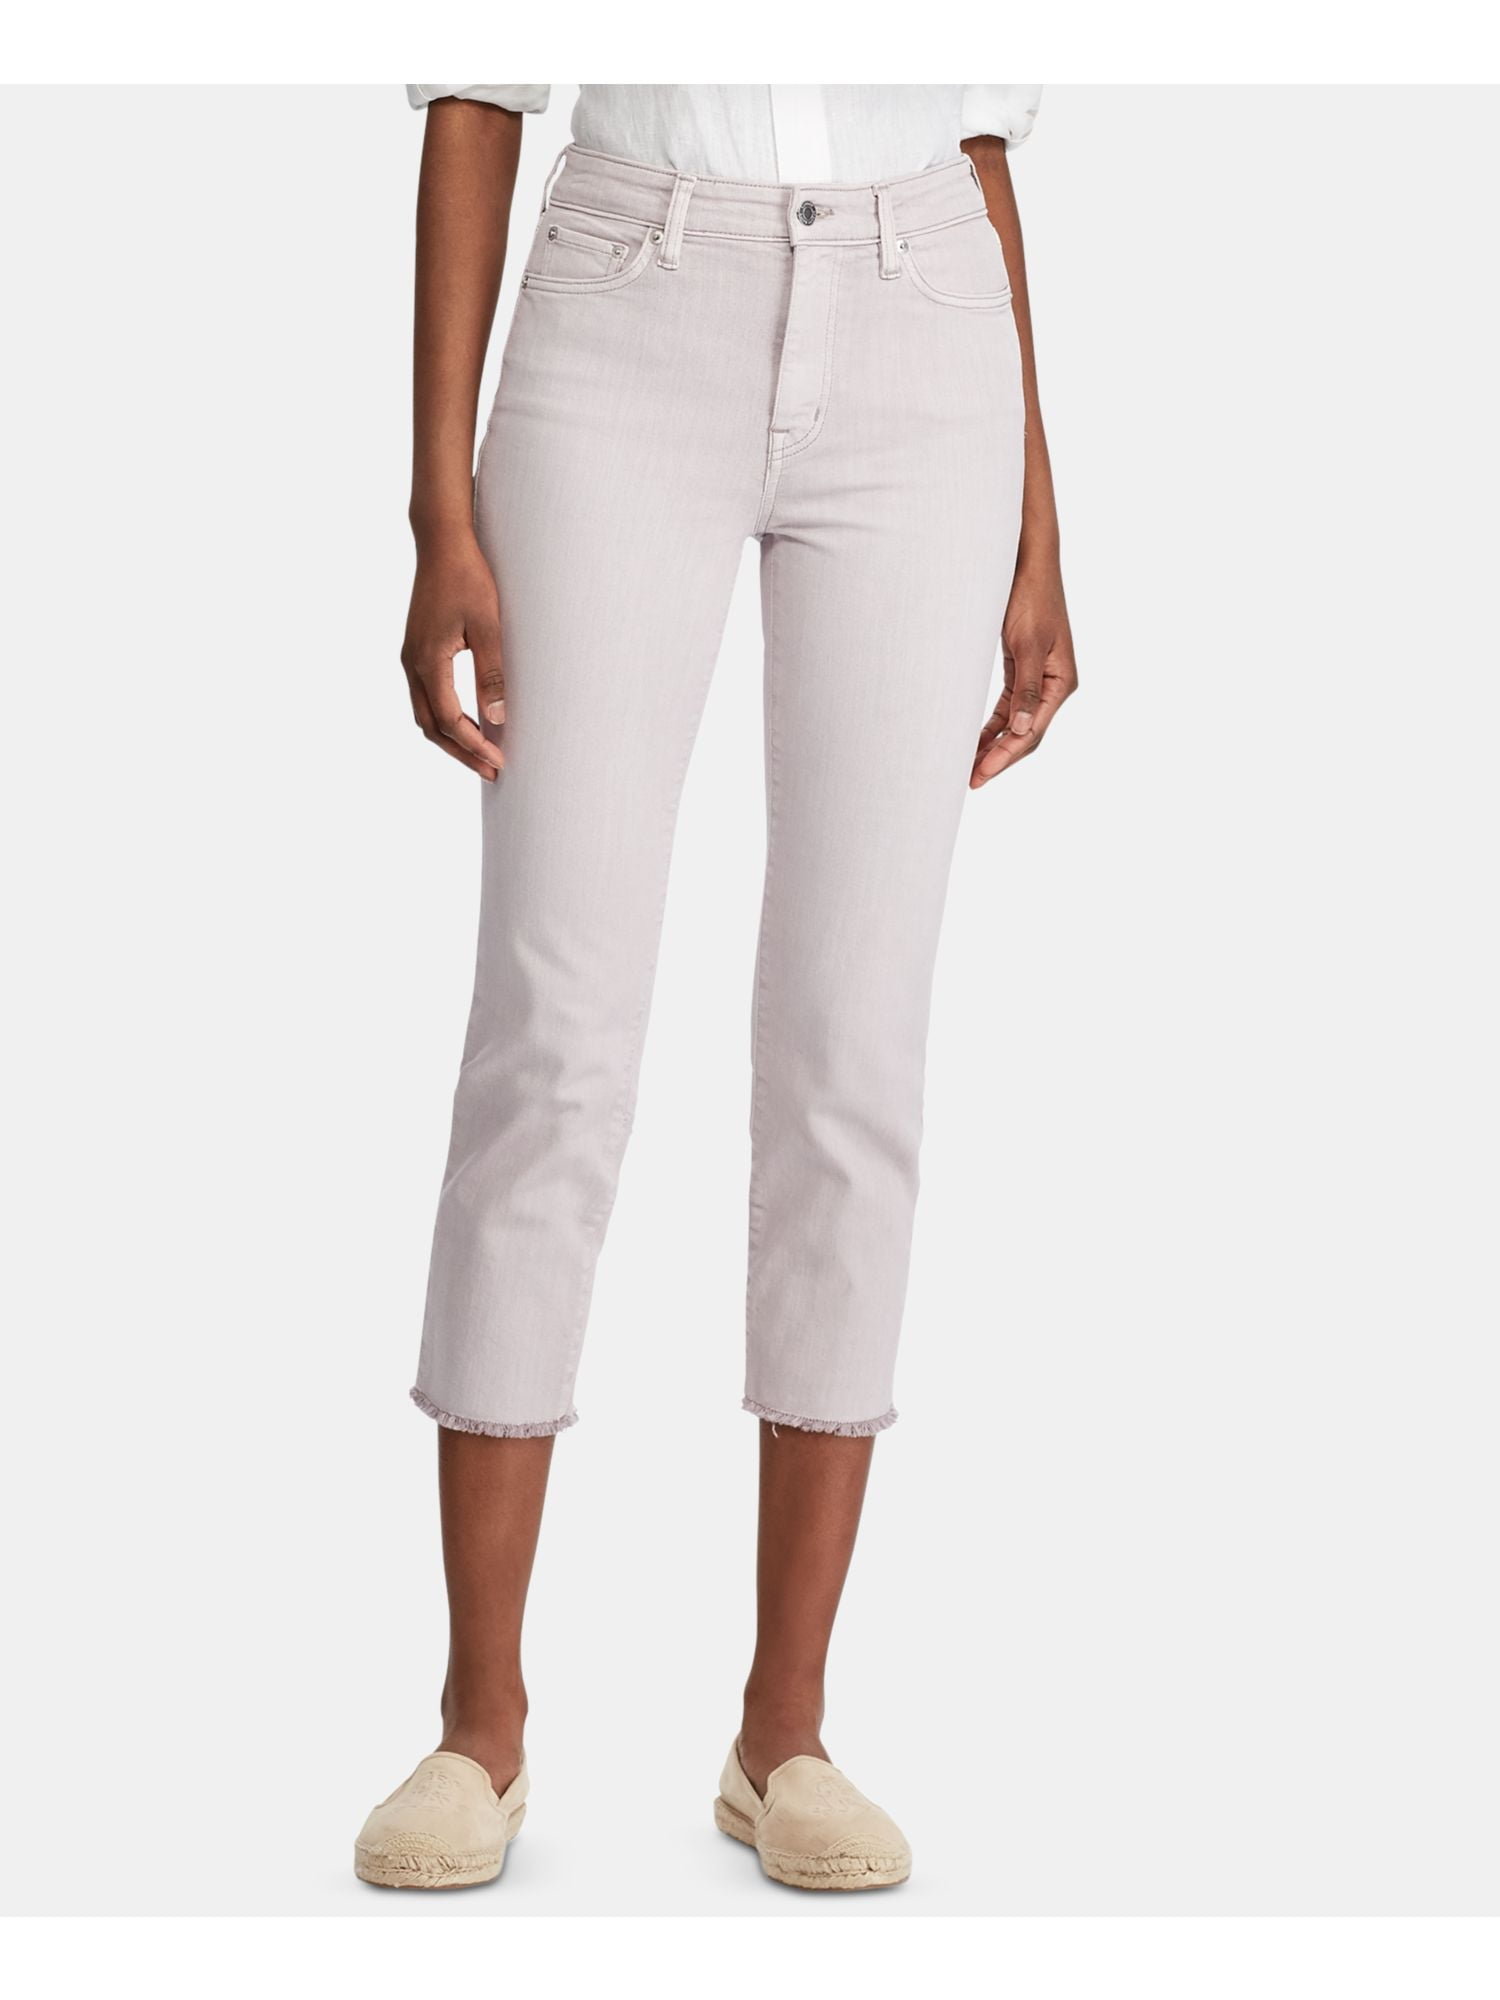 size 18 white jeans